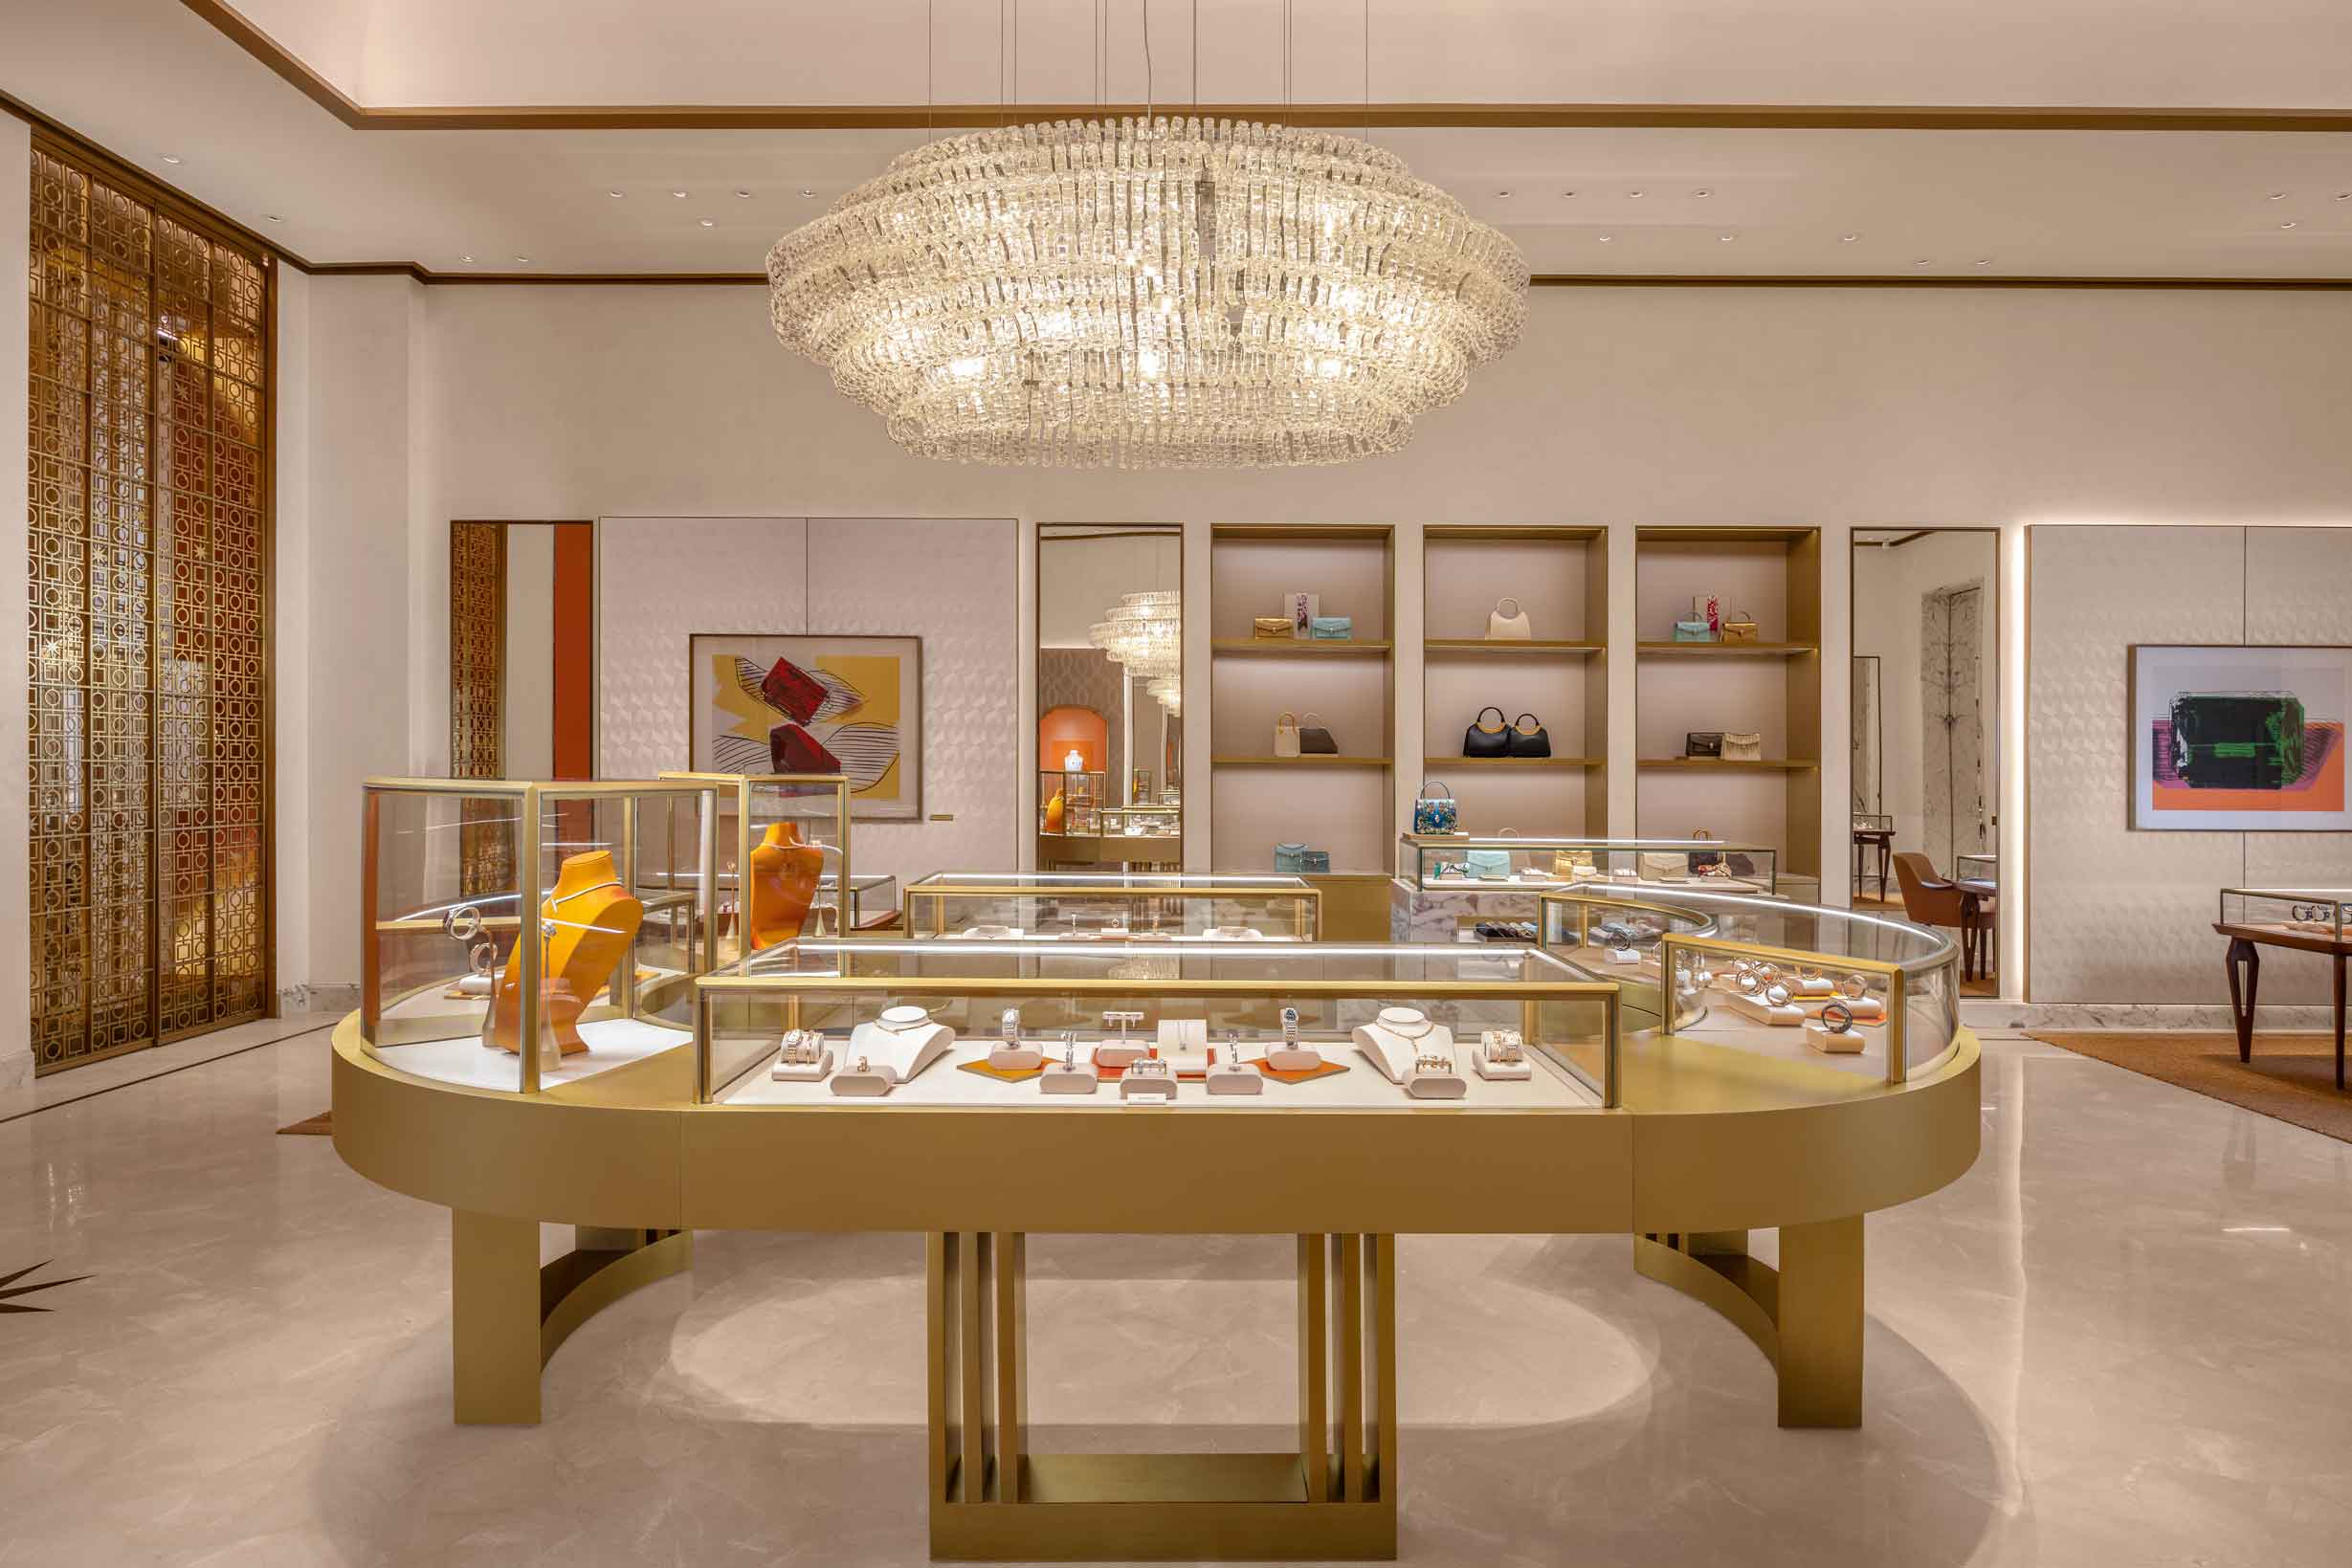 Louis Vuitton unveils its flagship store in India at the Jio World